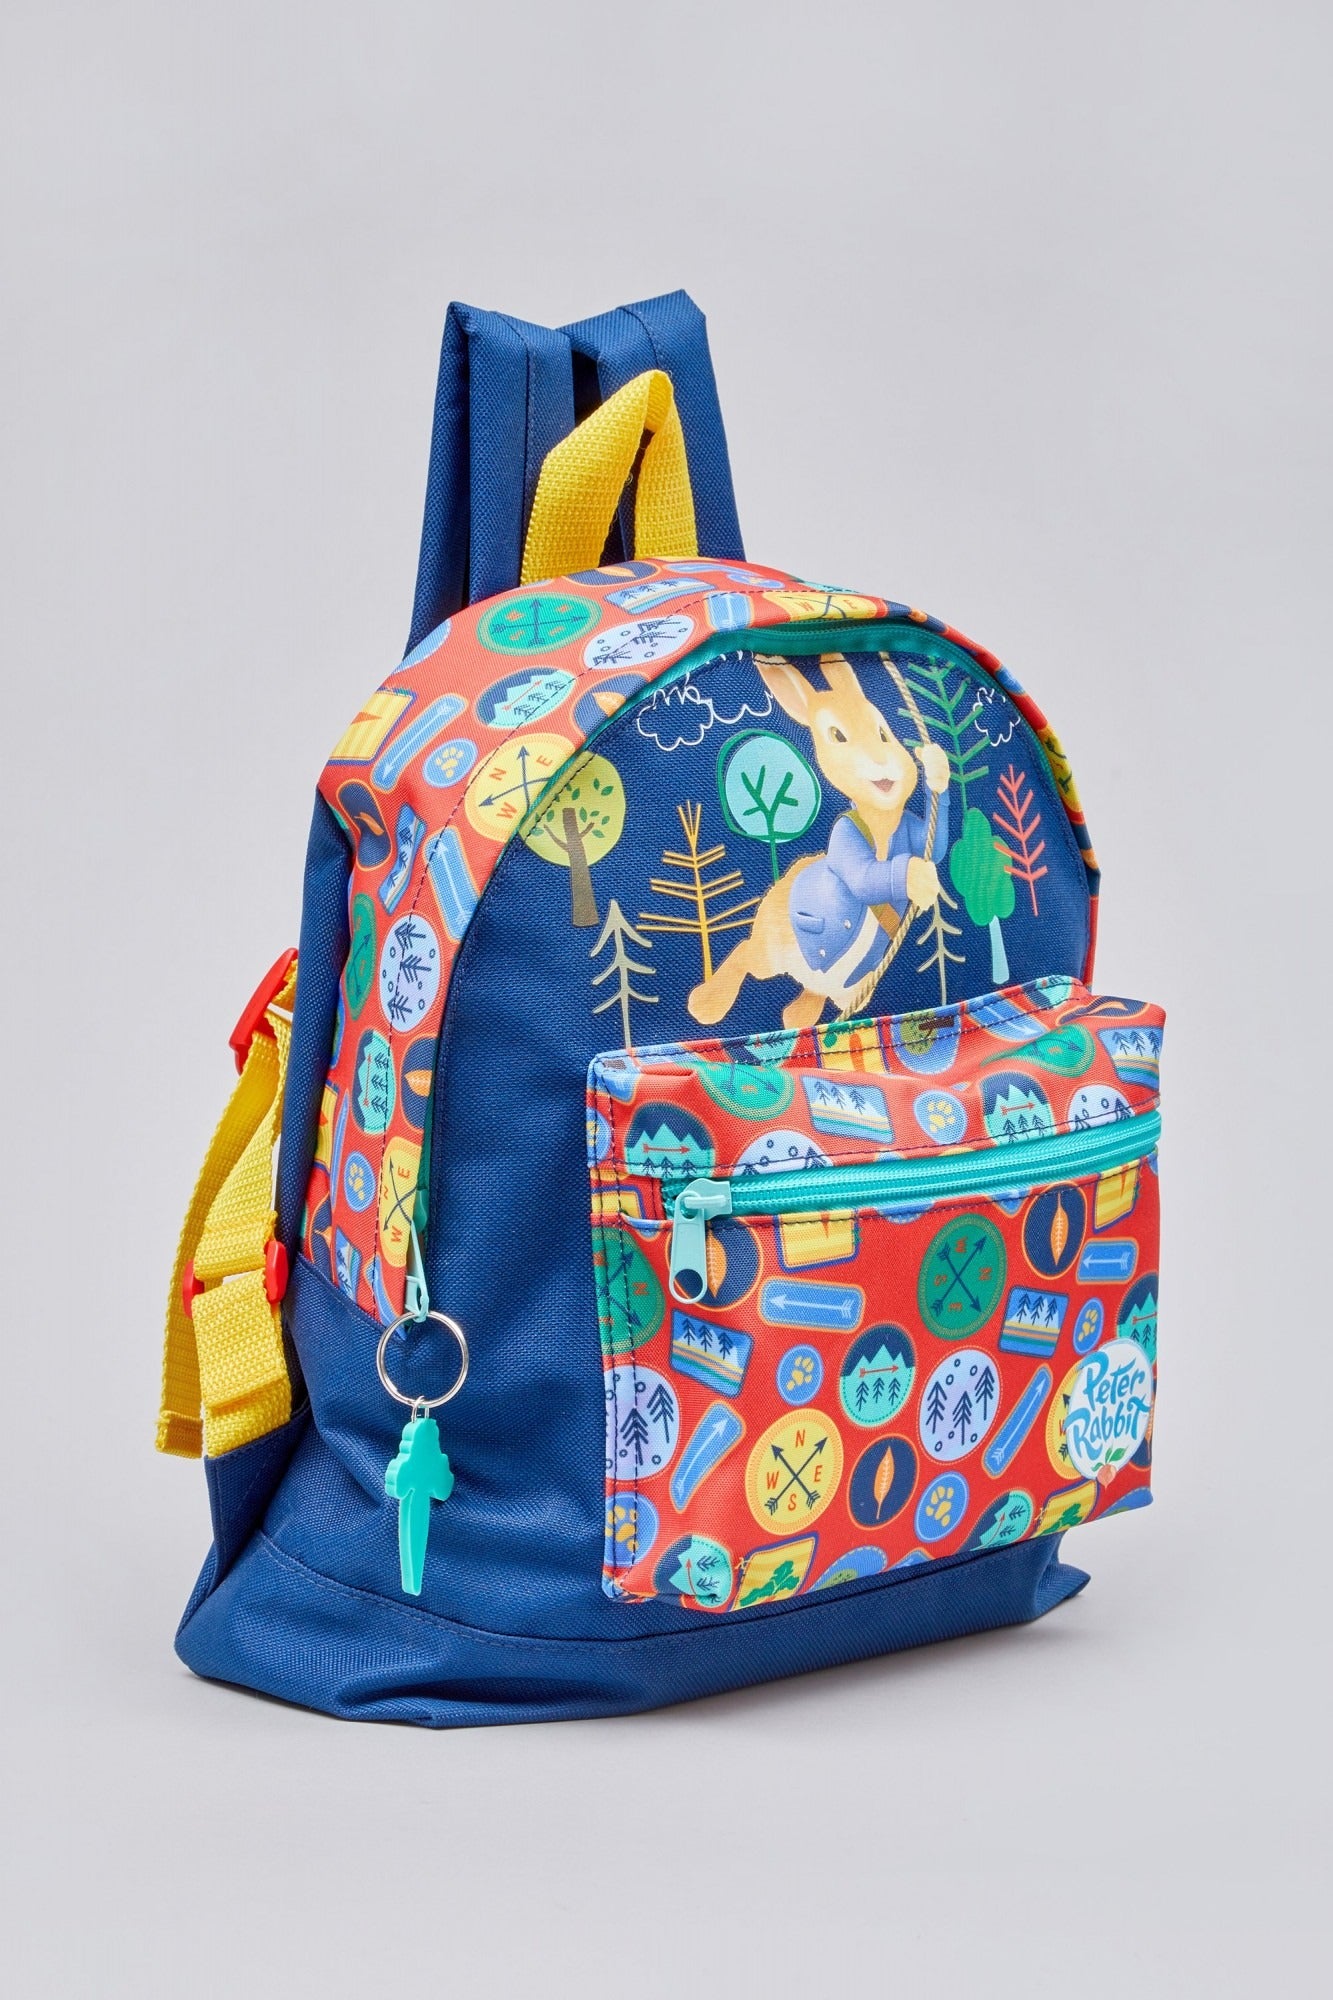 View Peter Rabbit Woodland Mini Roxy Backpack information